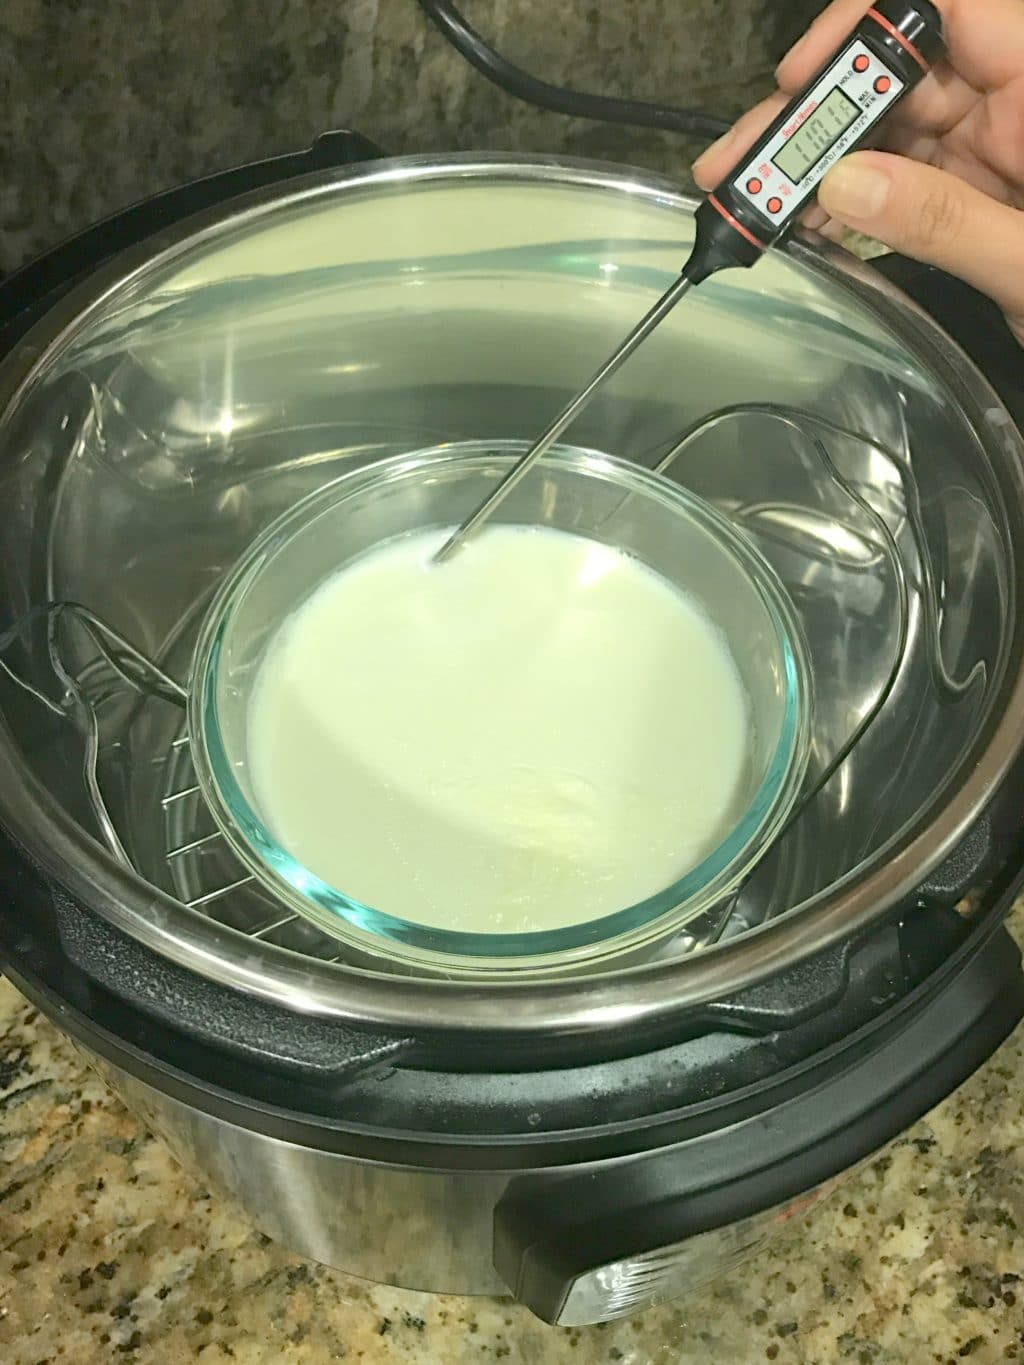 getting the temperature of yogurt in a bowl inside the instant pot